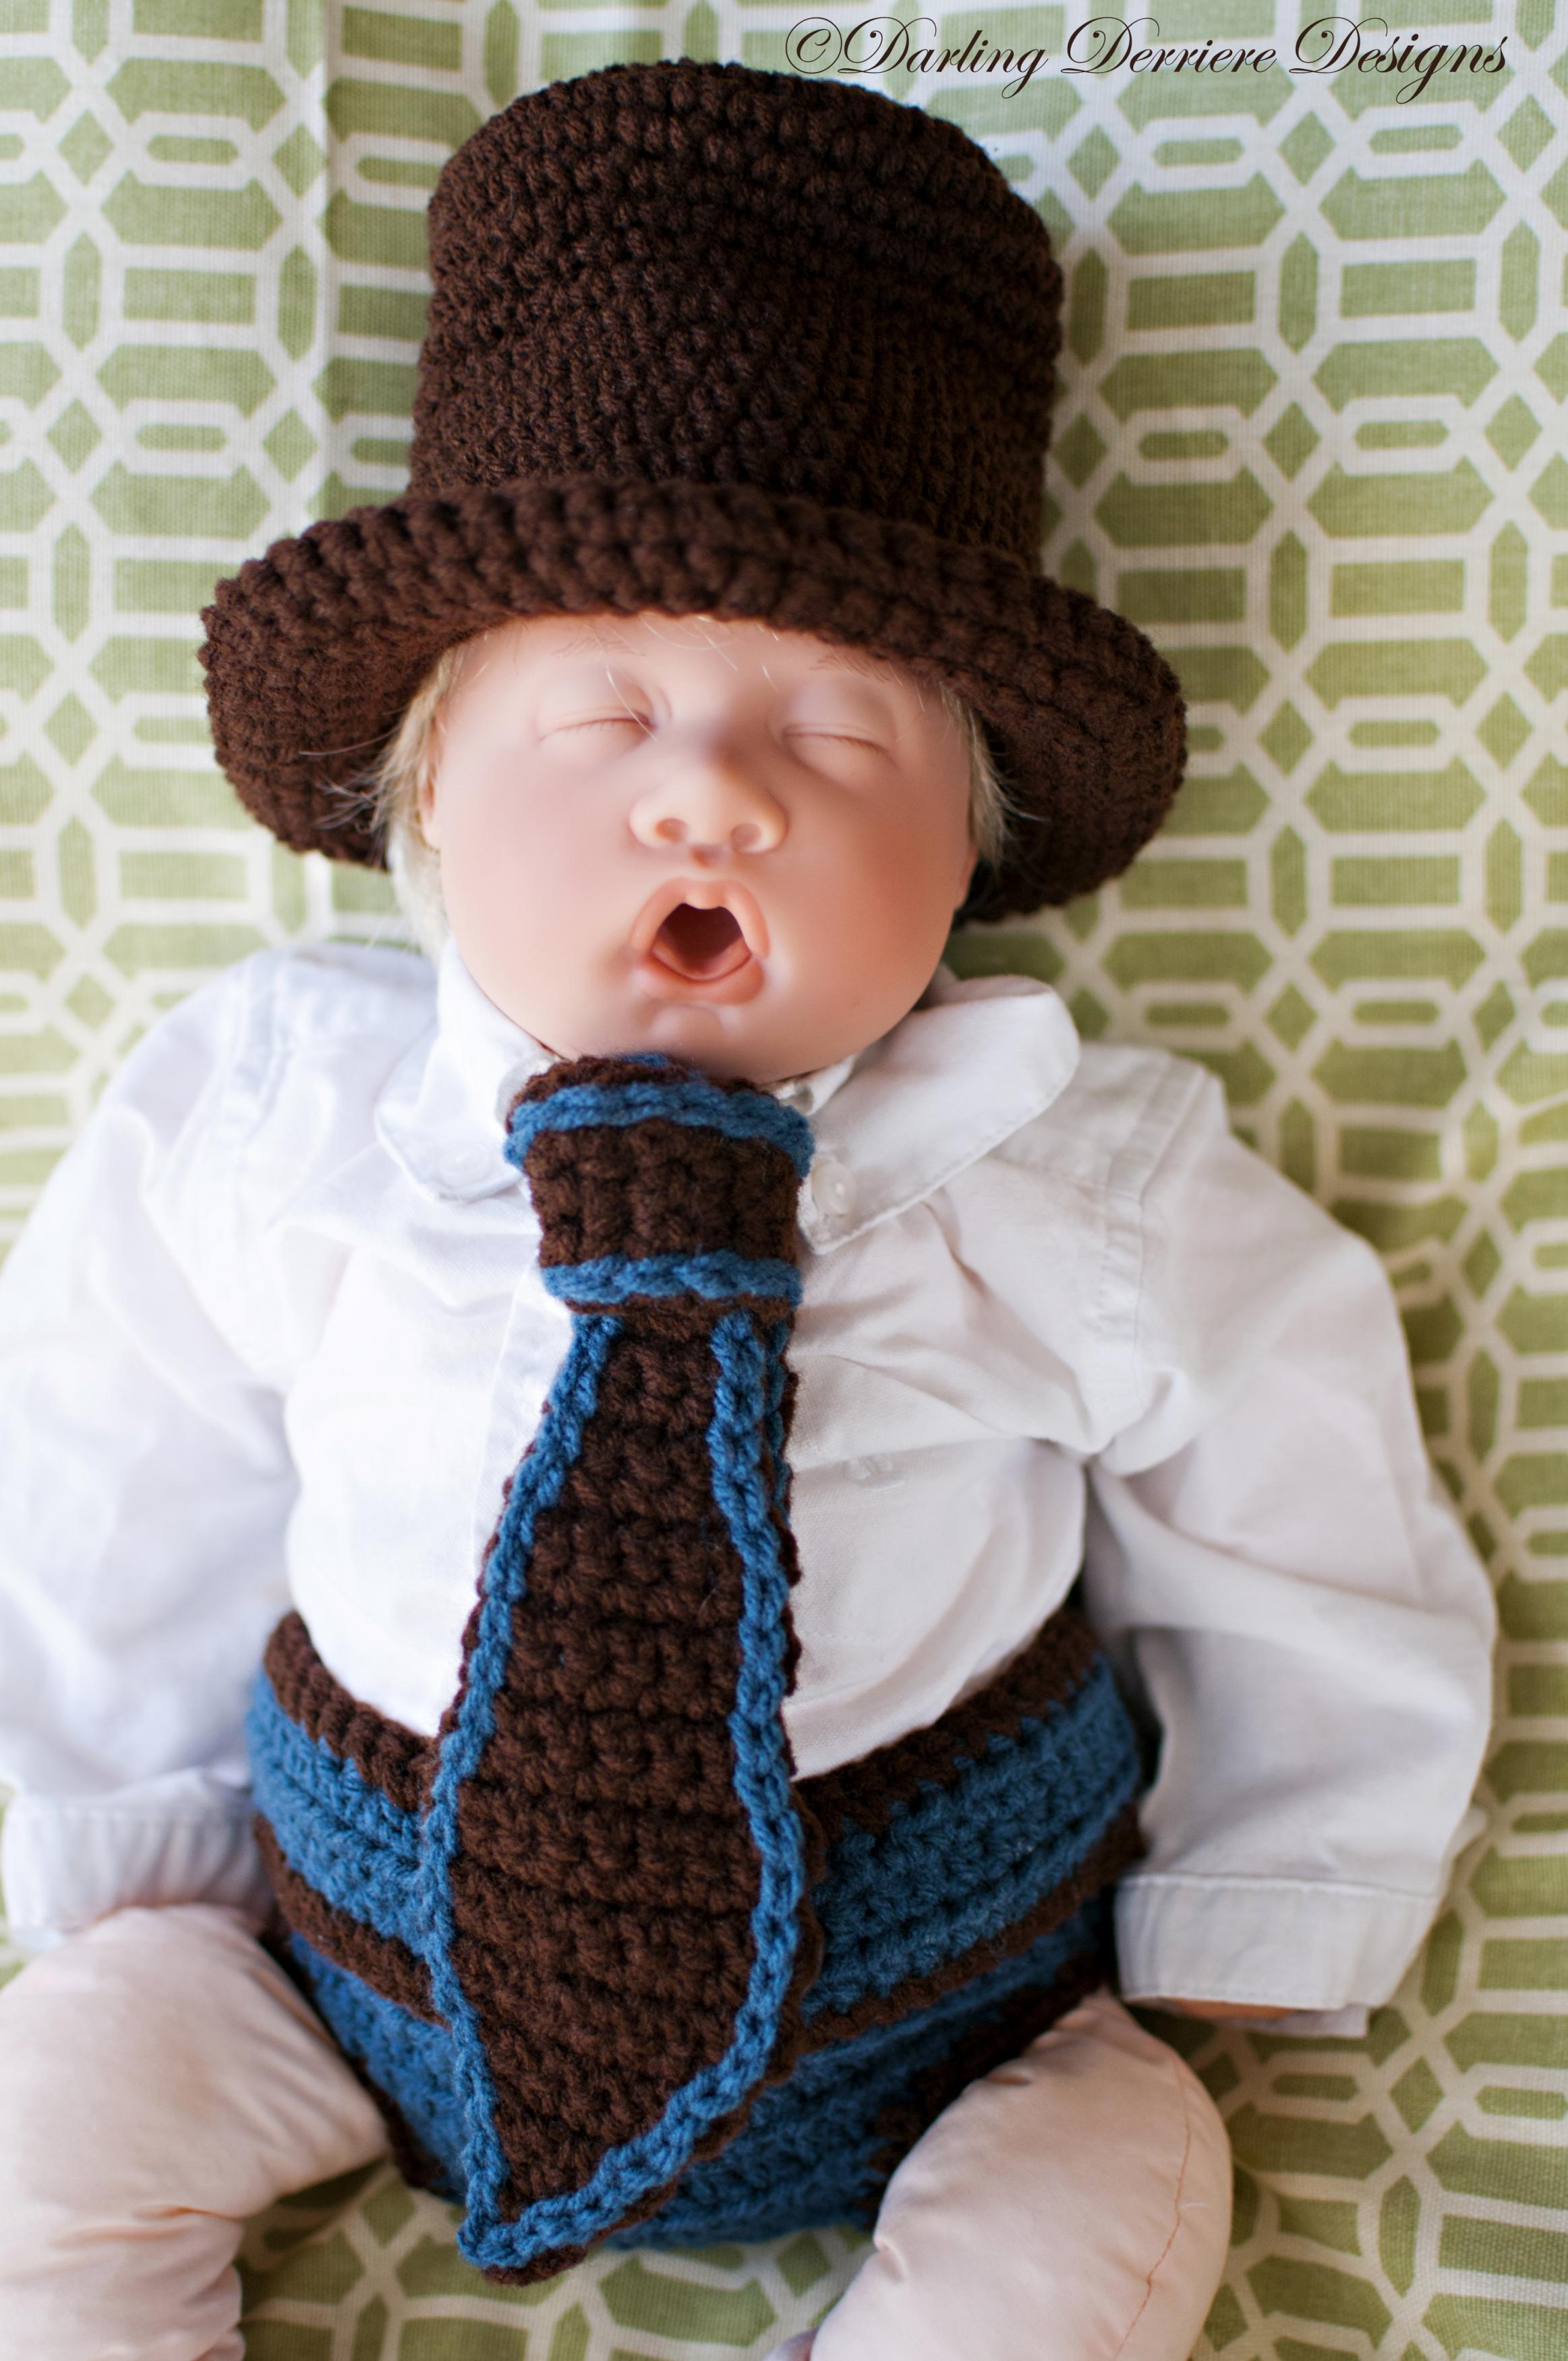 Crochet Baby Hat And Diaper Cover Pattern Top Hat Tie And Button Strap Diaper Cover Crochet Pattern On Luulla